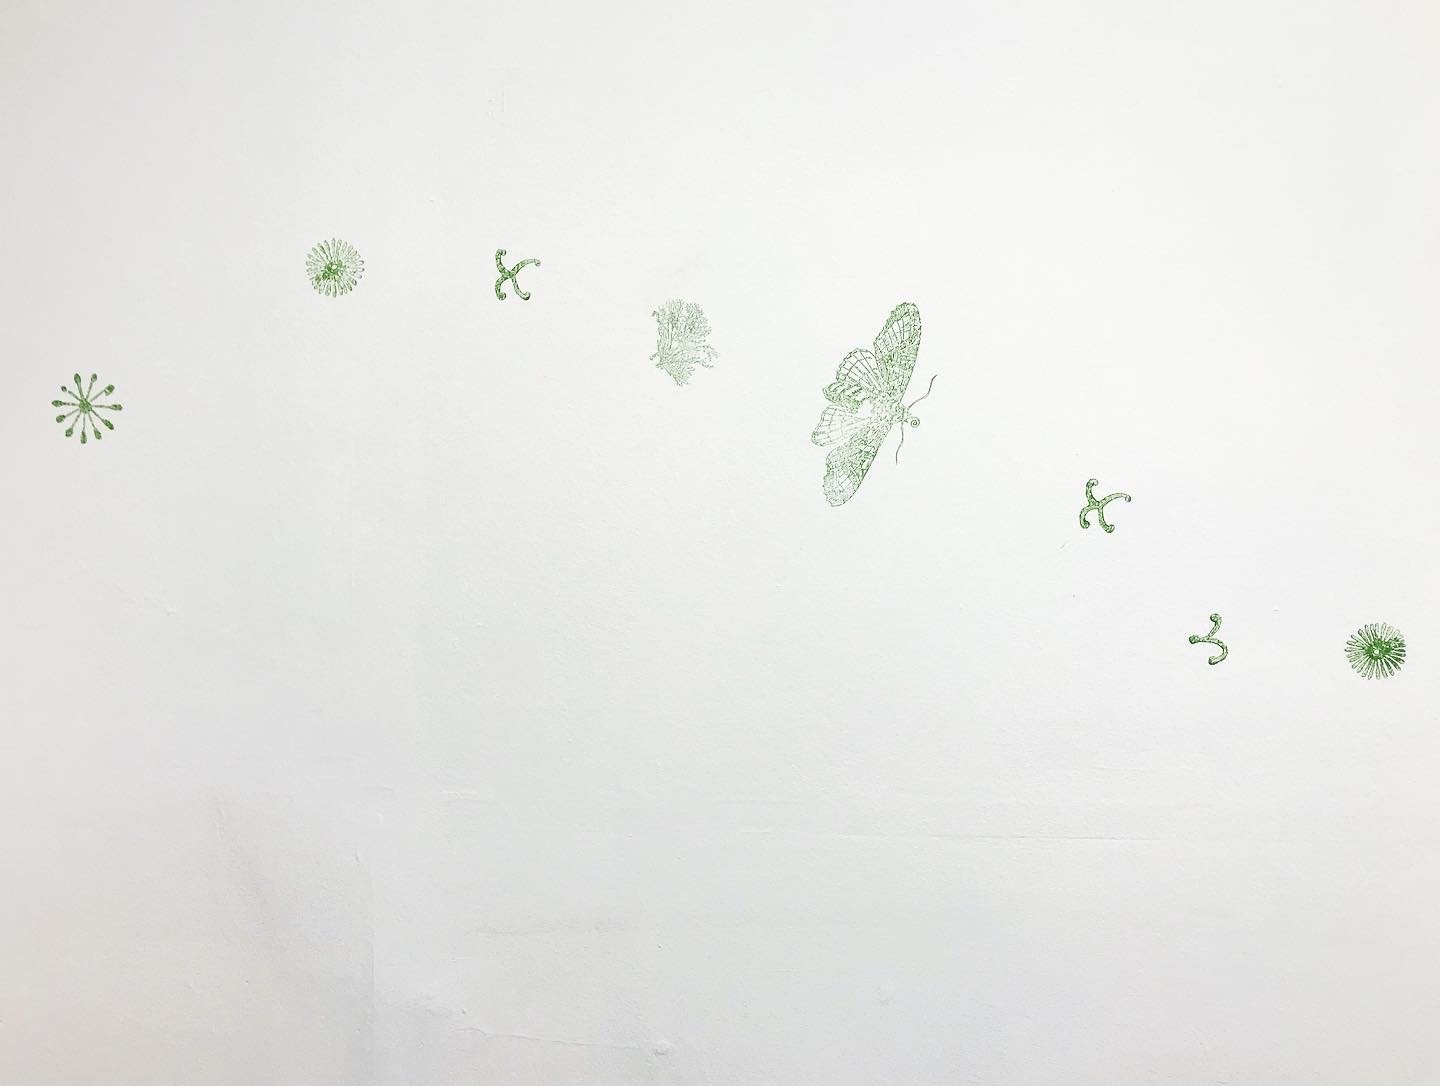  Stamped mural for Eunice Luk’s exhibition Seed to (small) flower   May 7-29, 2022  Polyster Studios, Toronto 